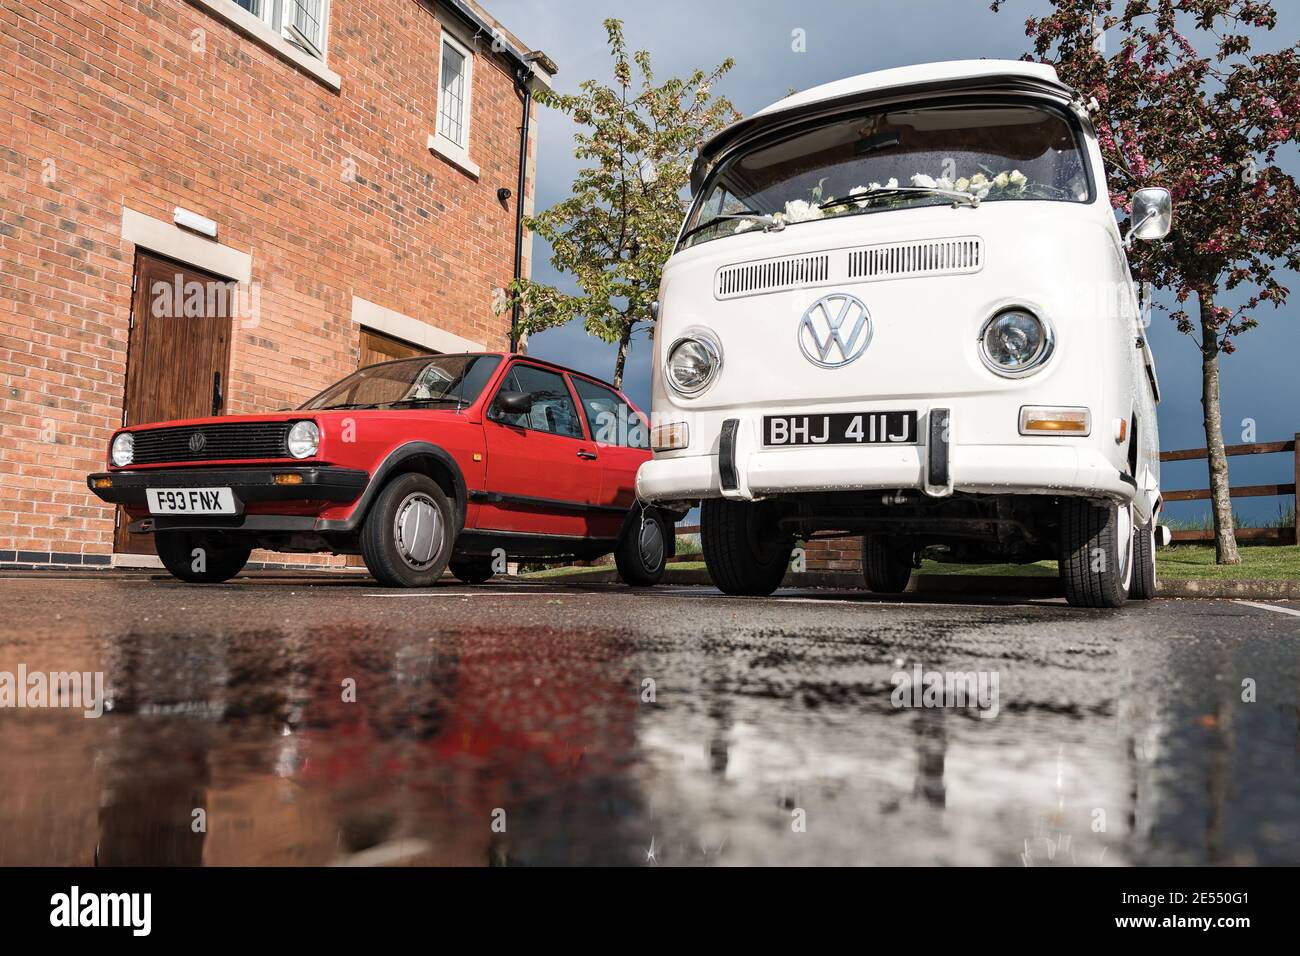 Page 3 - Vw Camper High Resolution Stock Photography and Images - Alamy